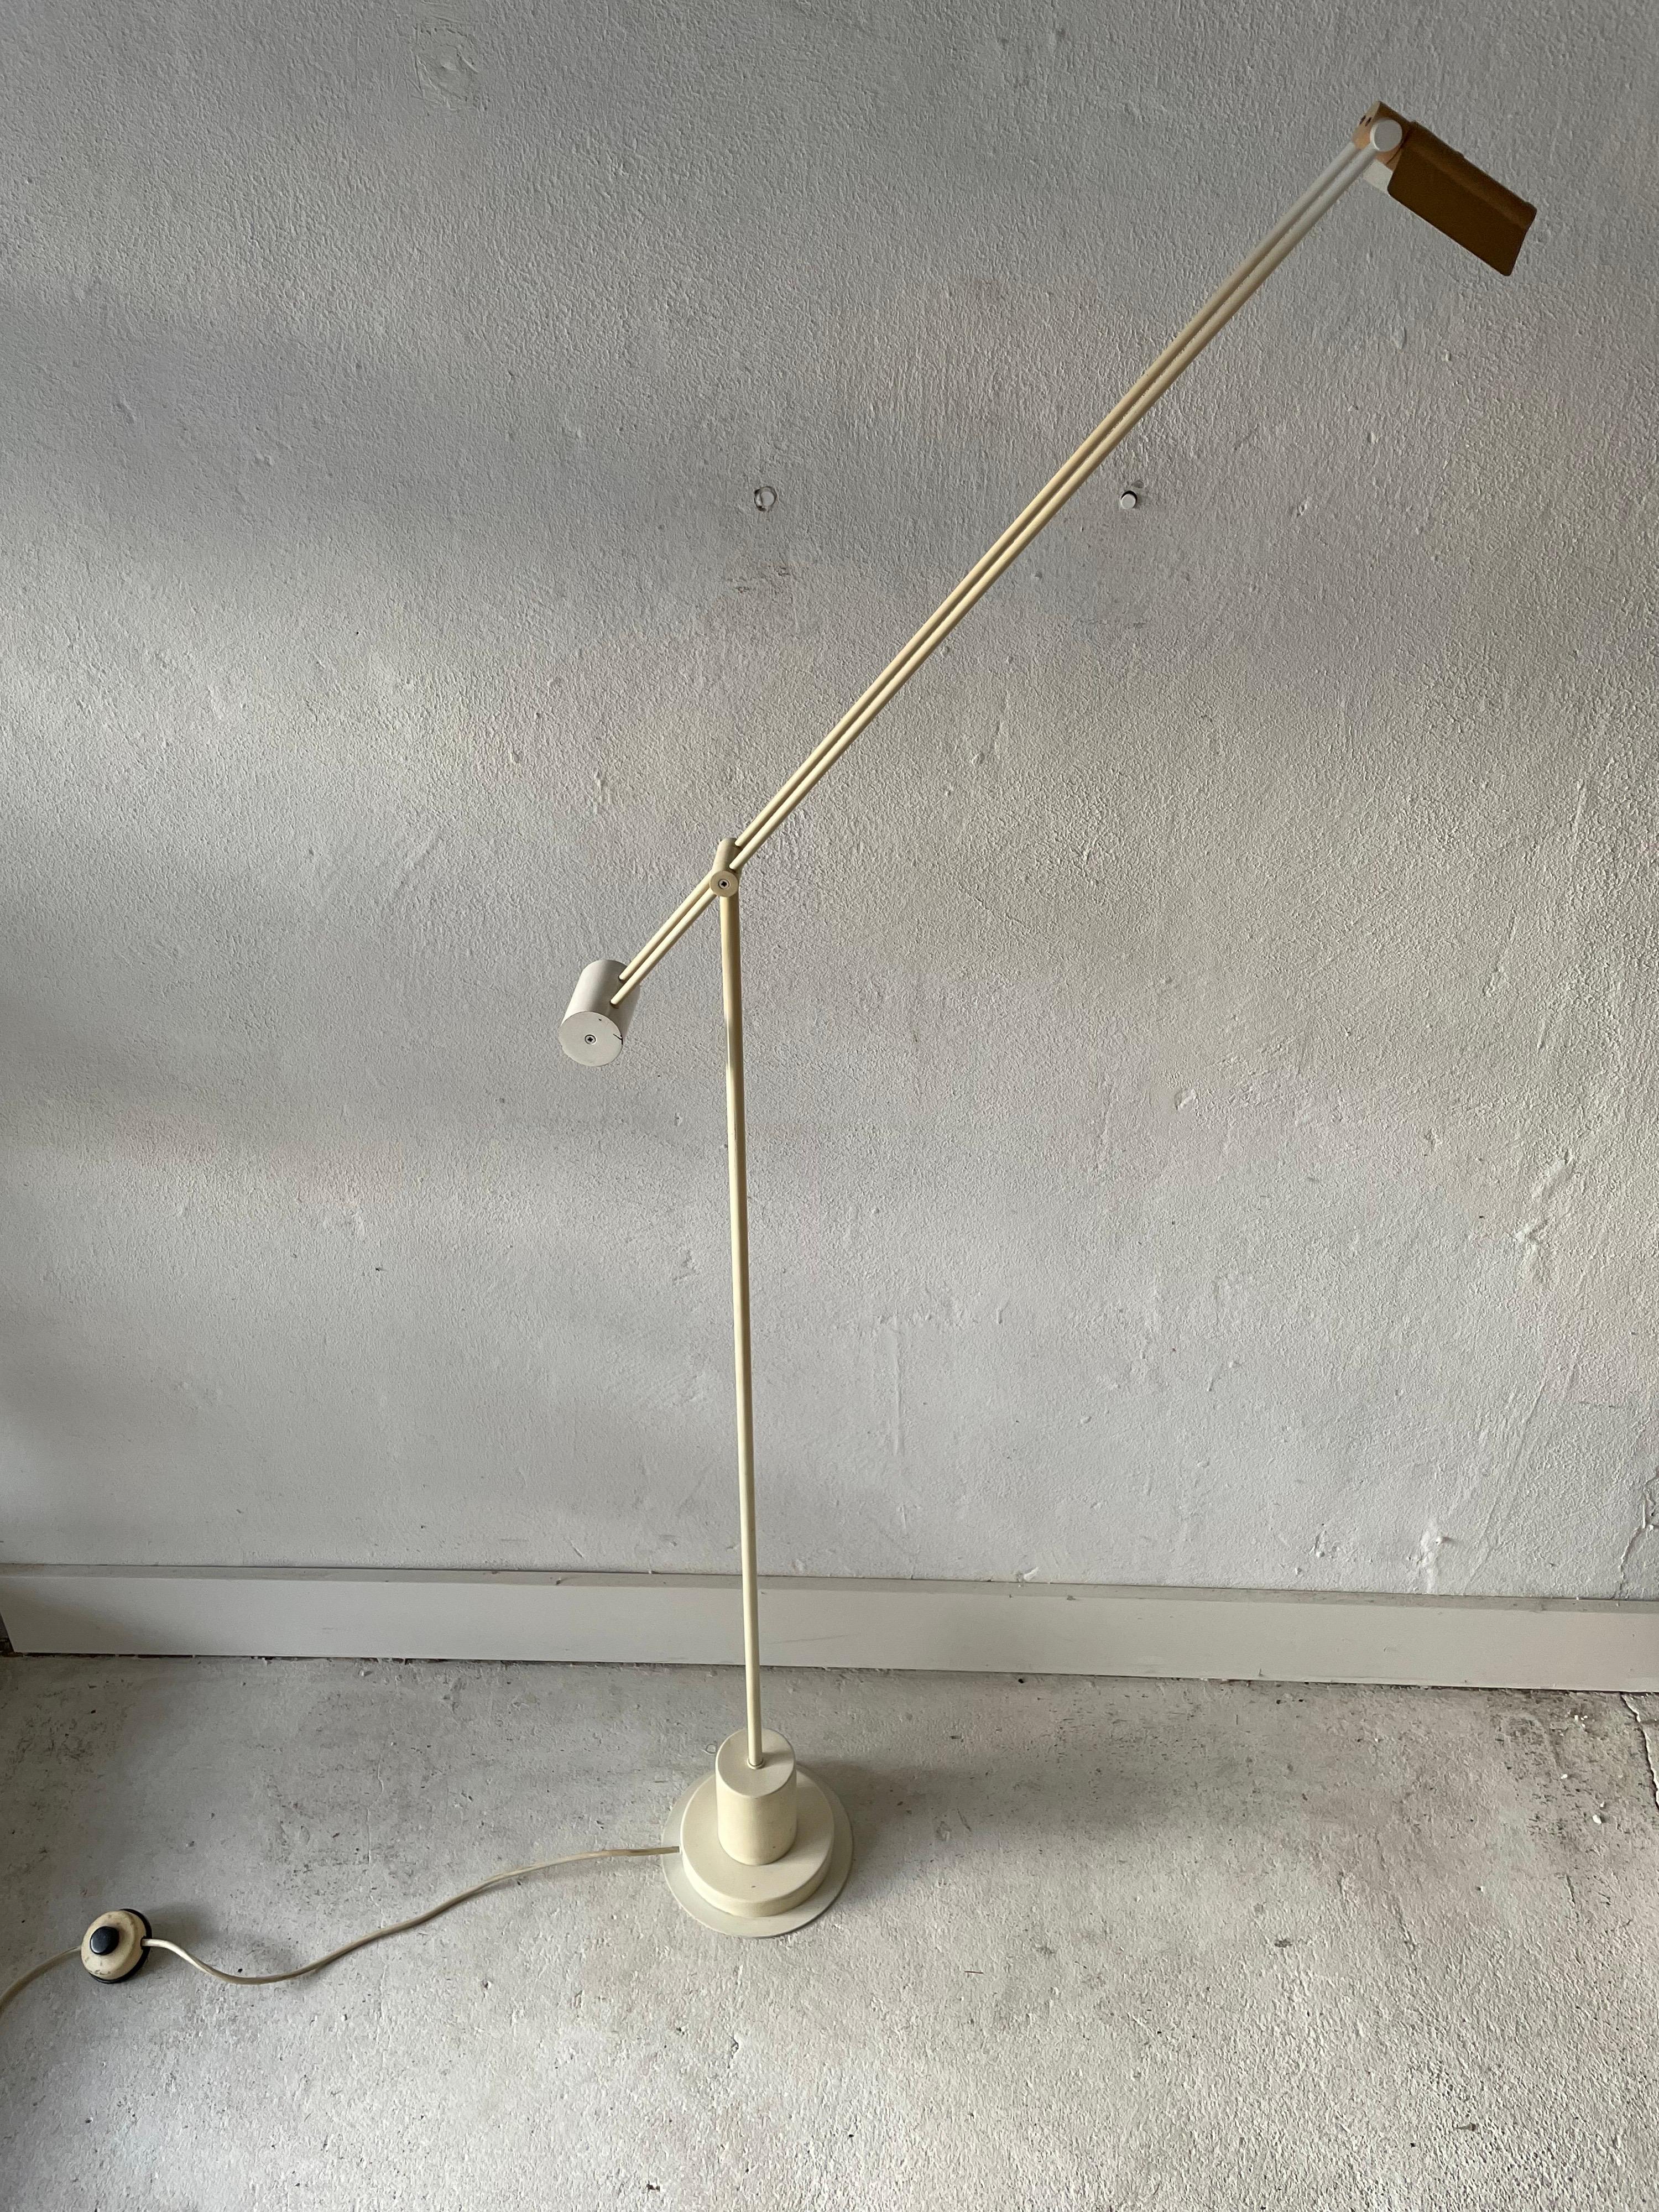 Pink Head White Metal floor lamp by Cosack 1970s, Germany

Lamp is in very good vintage condition.

This lamp works with halogen light bulb. Max 100W
Wired and suitable to use with 220V and 110V for all countries.

Measurements:
Height: 162